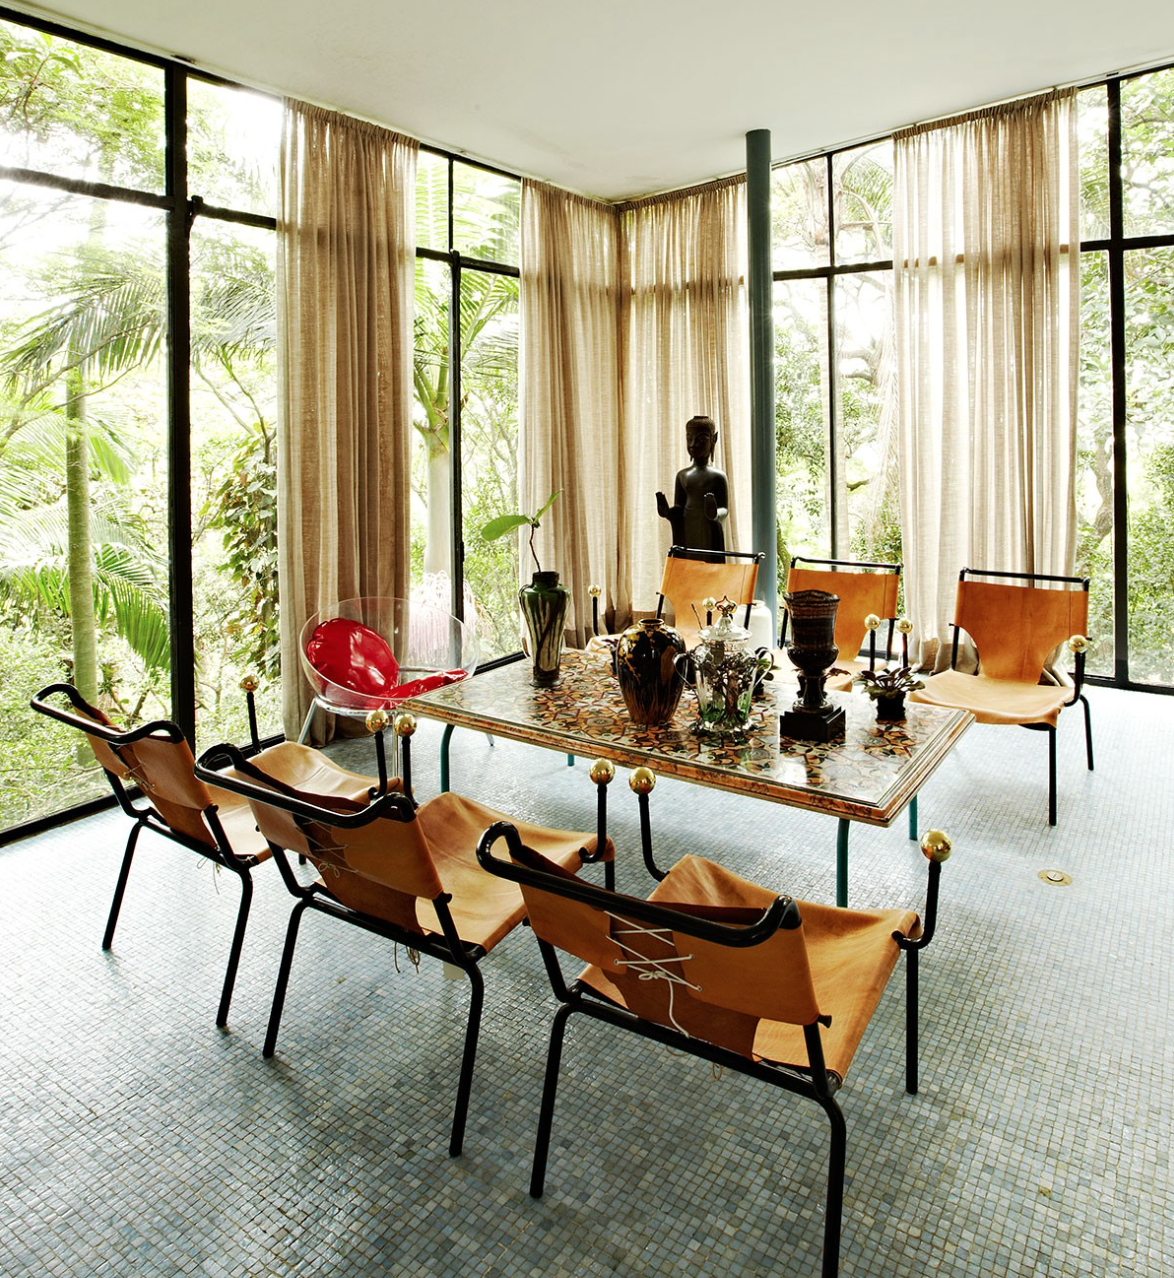 Lina Bo Bardi's Glass House in São Paulo, photographed by Adrian Gaut for PIN–UP